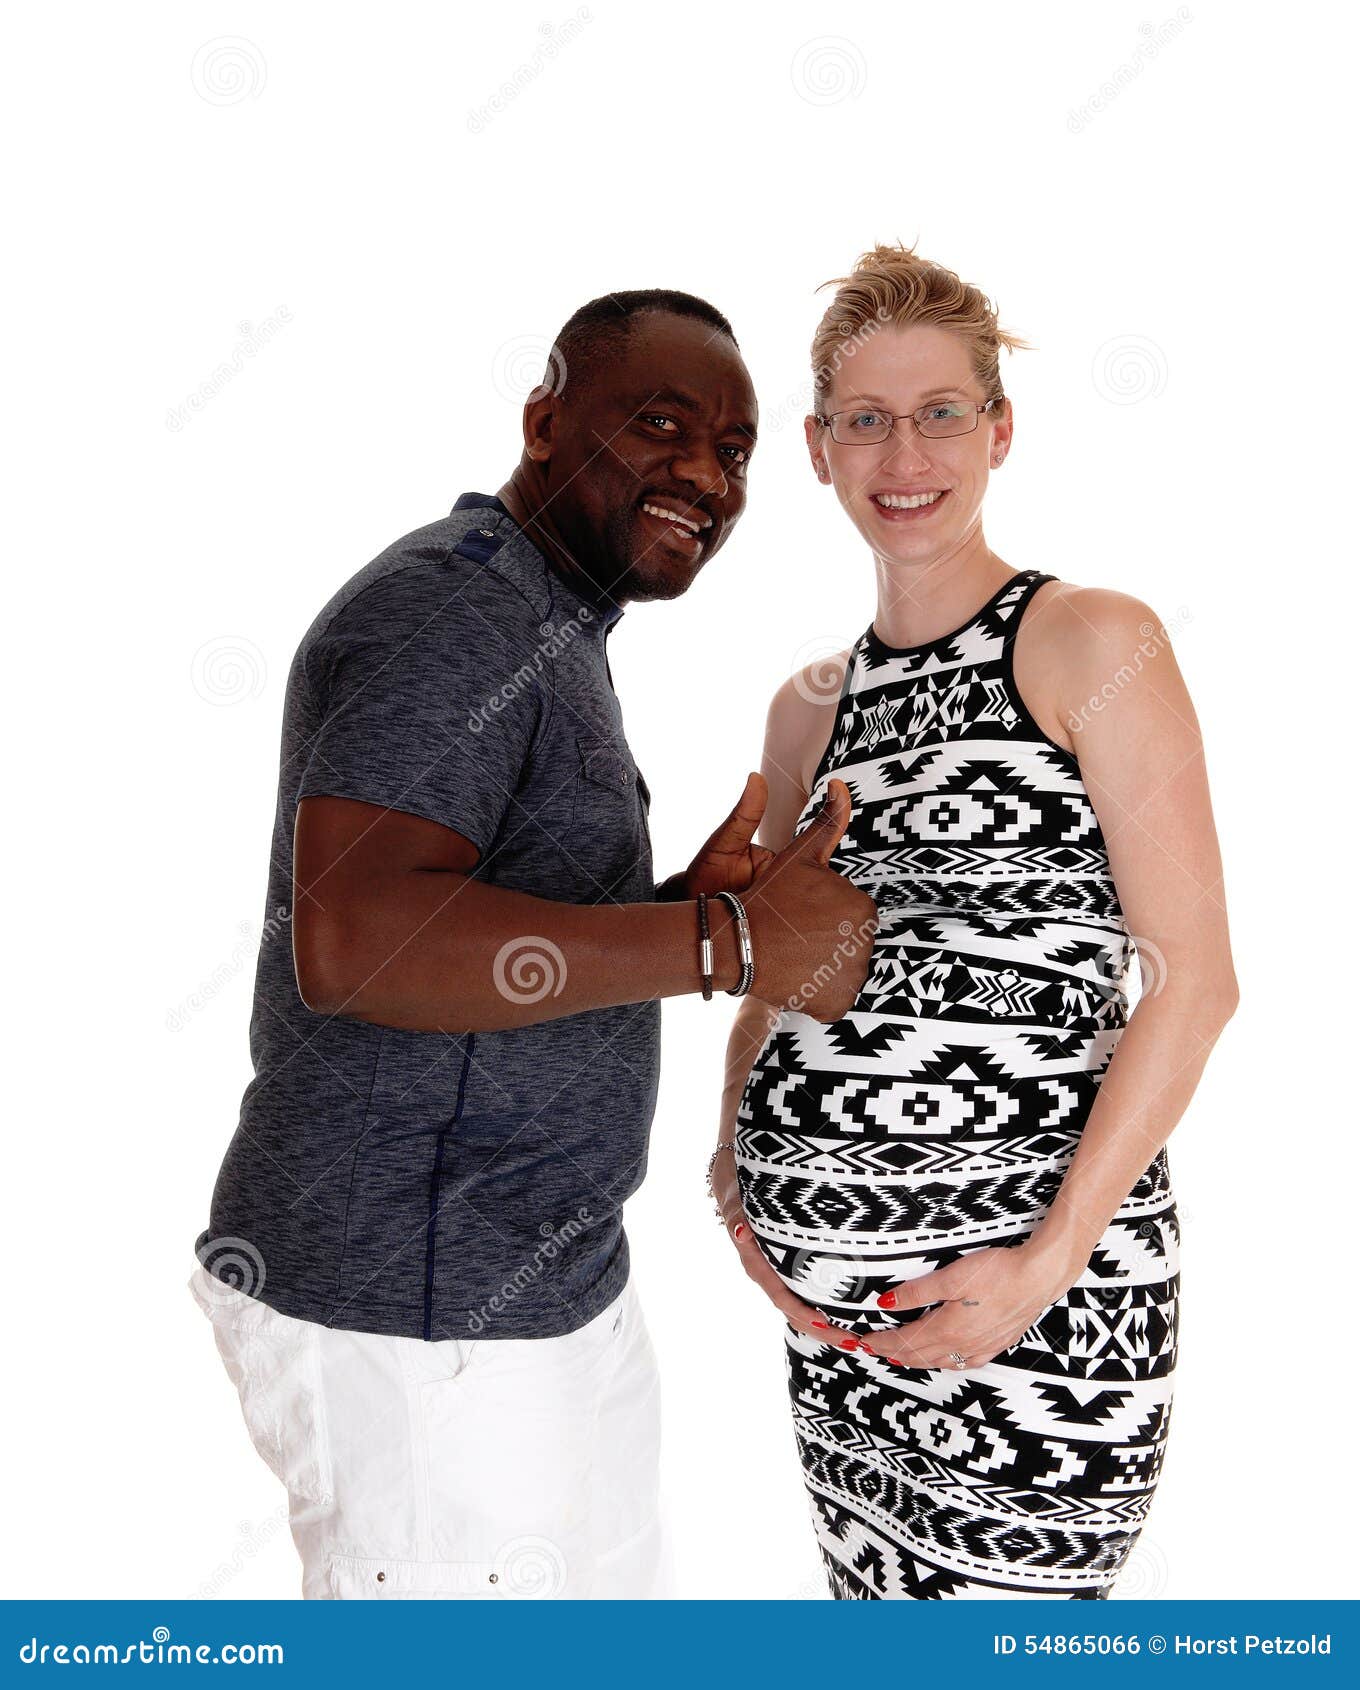 White girl pregnant with black baby